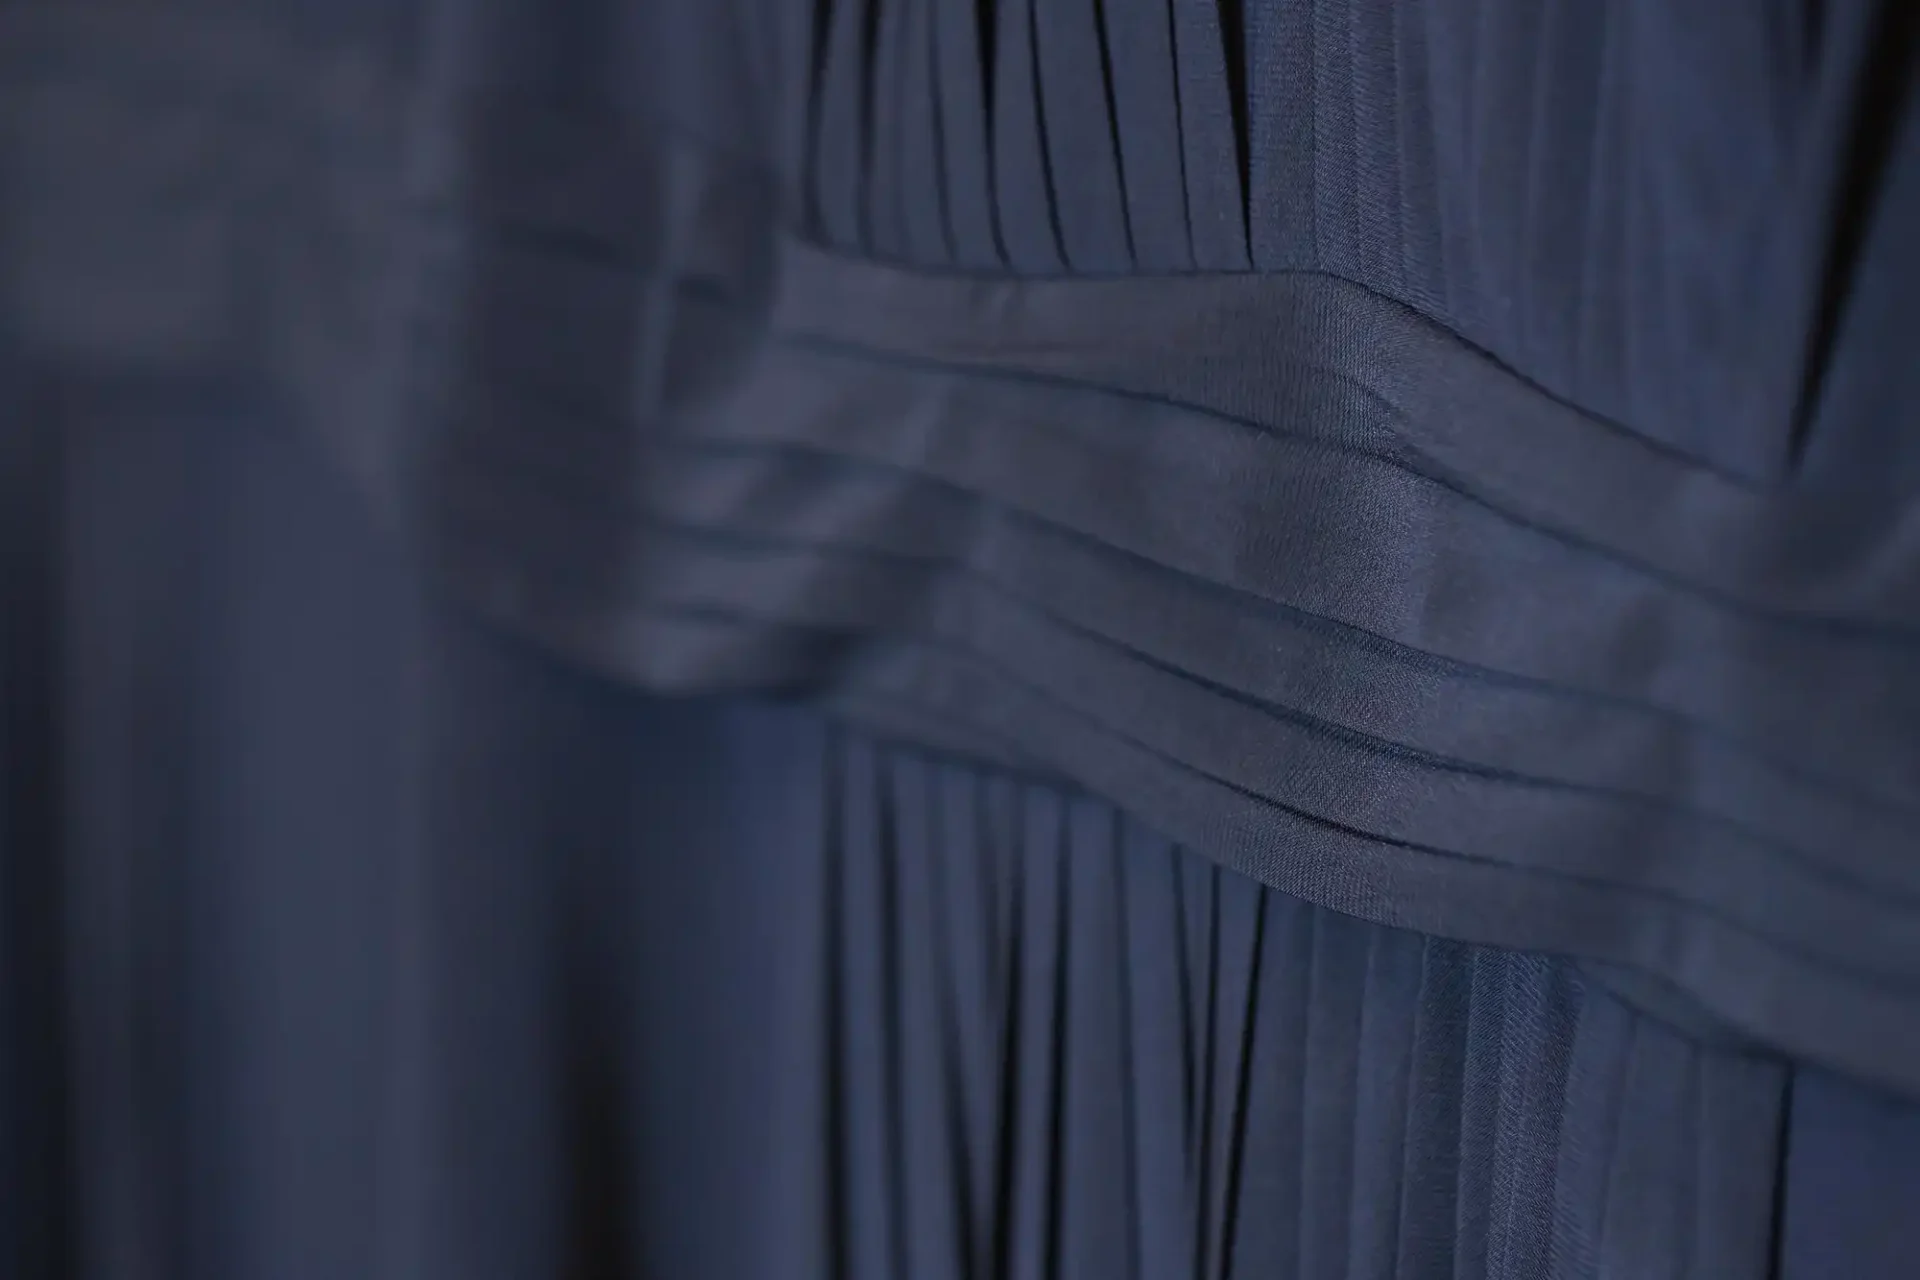 Close-up of a blue garment with detailed pleats and textured fabric.